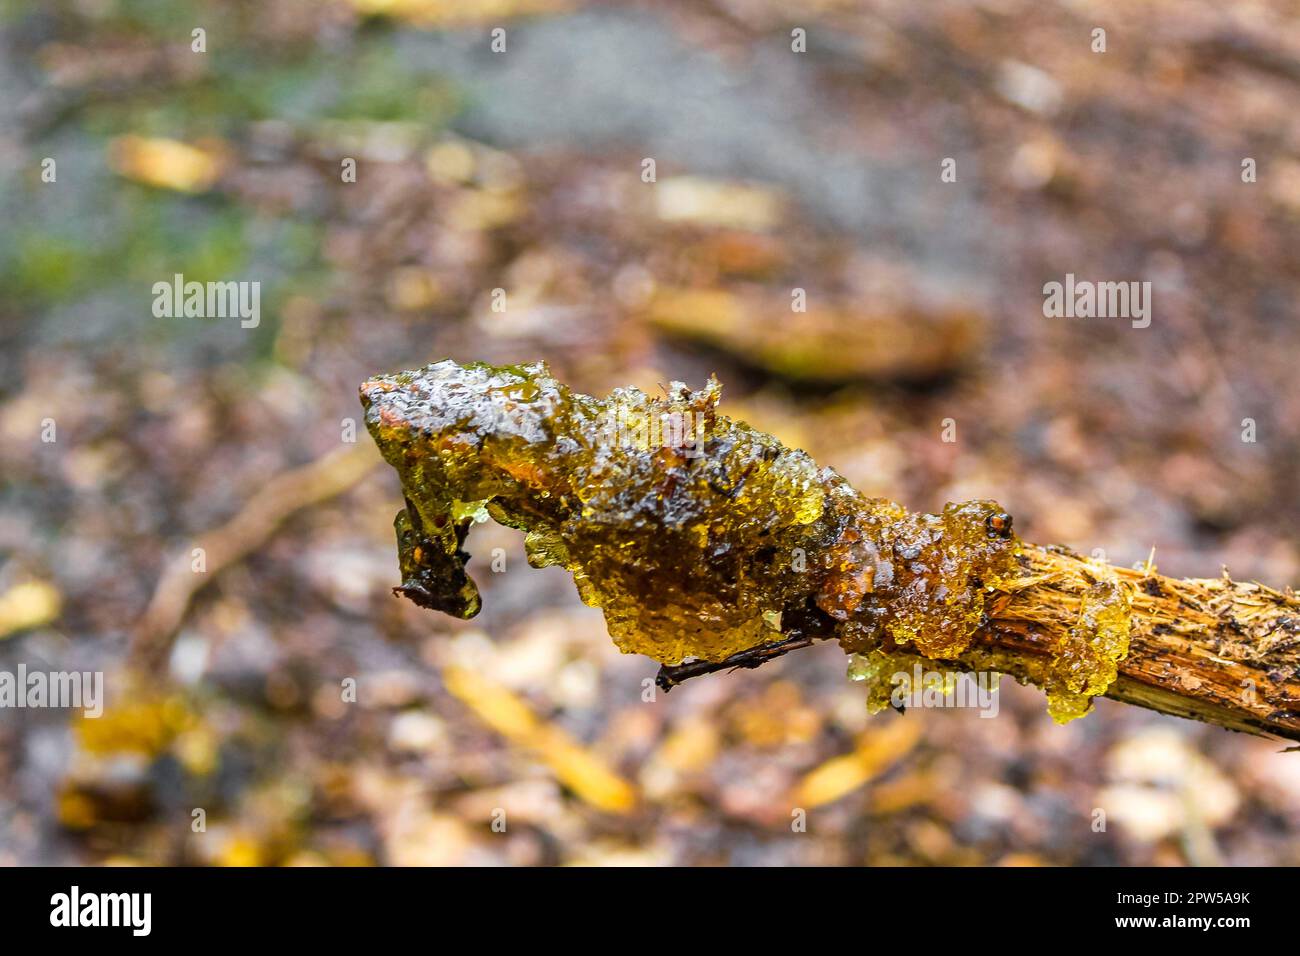 Green yellow angular slime in Drangstedt forest in Geestland Cuxhaven Lower Saxony Germany. Stock Photo